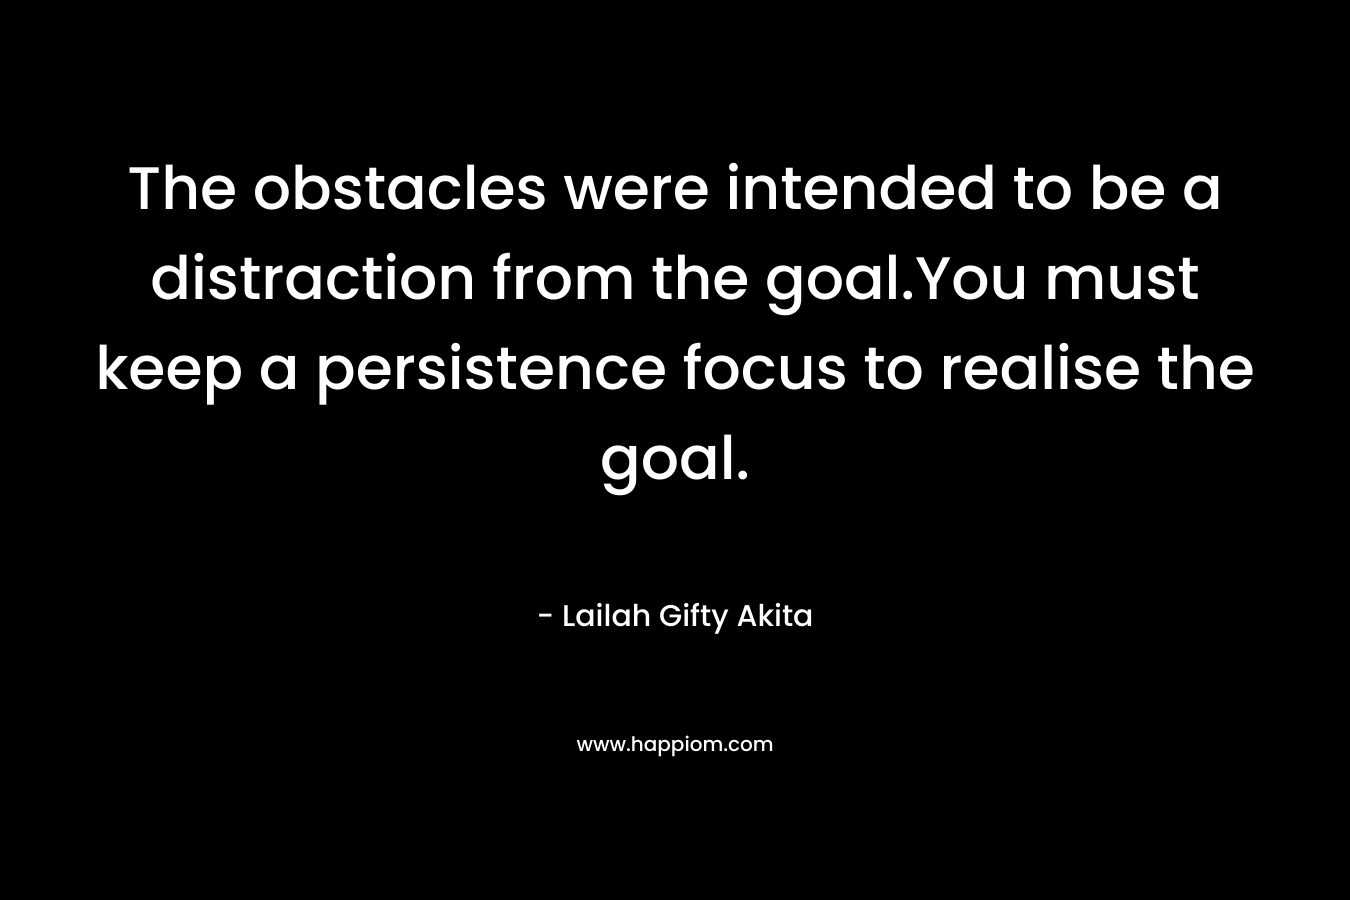 The obstacles were intended to be a distraction from the goal.You must keep a persistence focus to realise the goal.